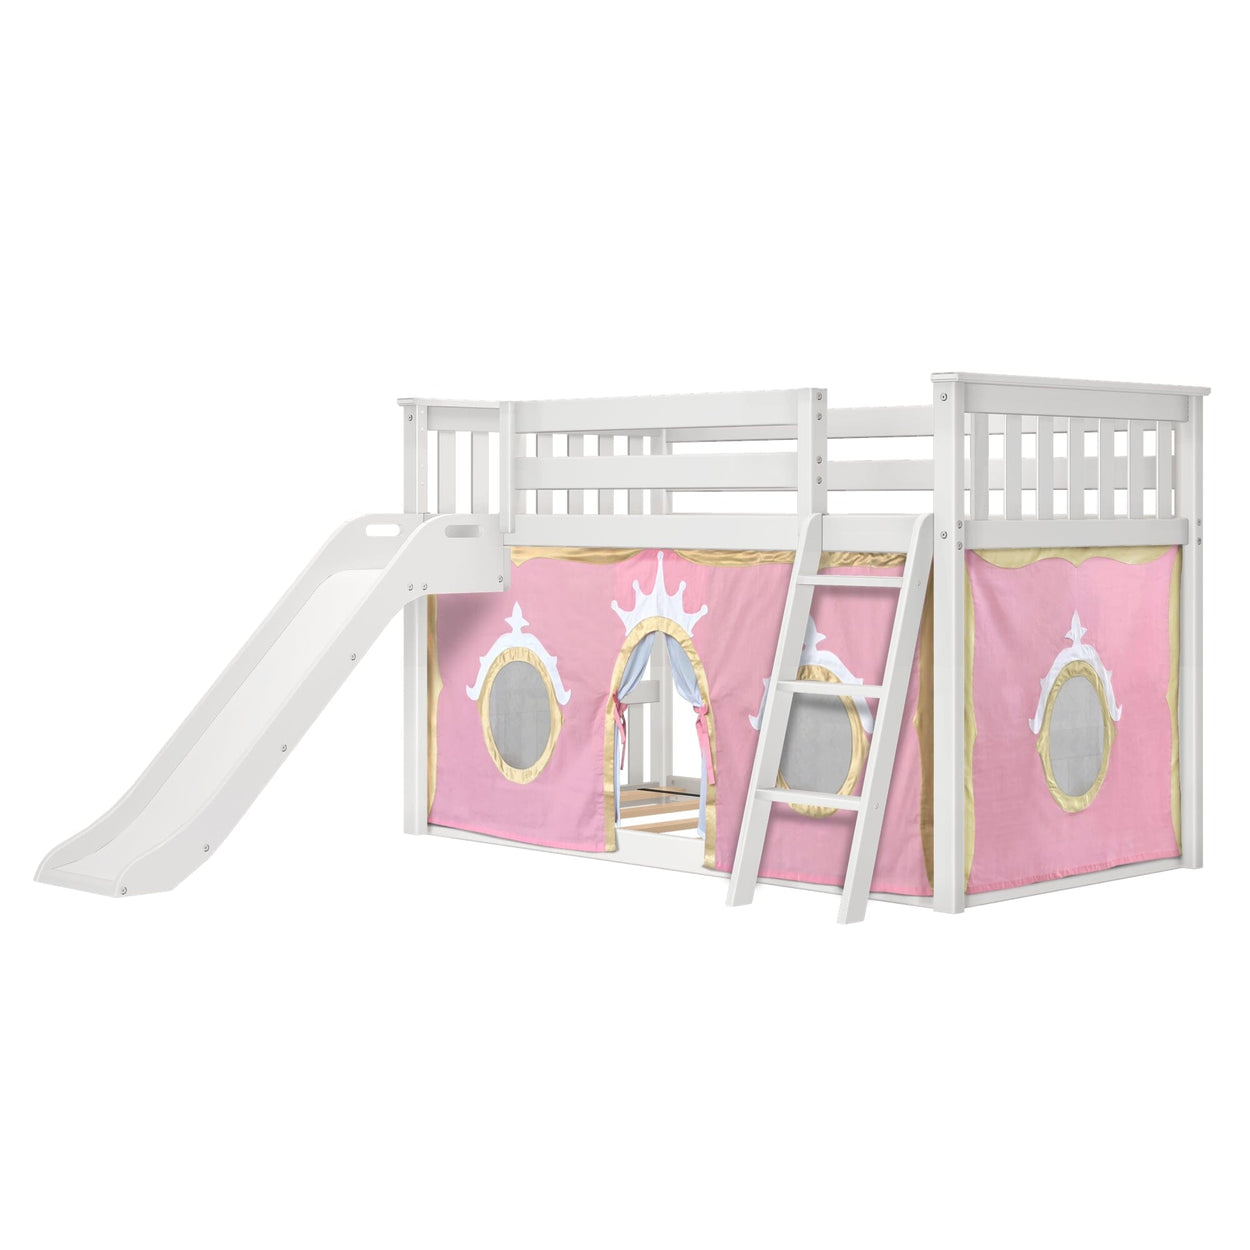 180417002083 : Bunk Beds Low Bunk with Easy Slide and Light Pink and Gold Princess Curtain, White